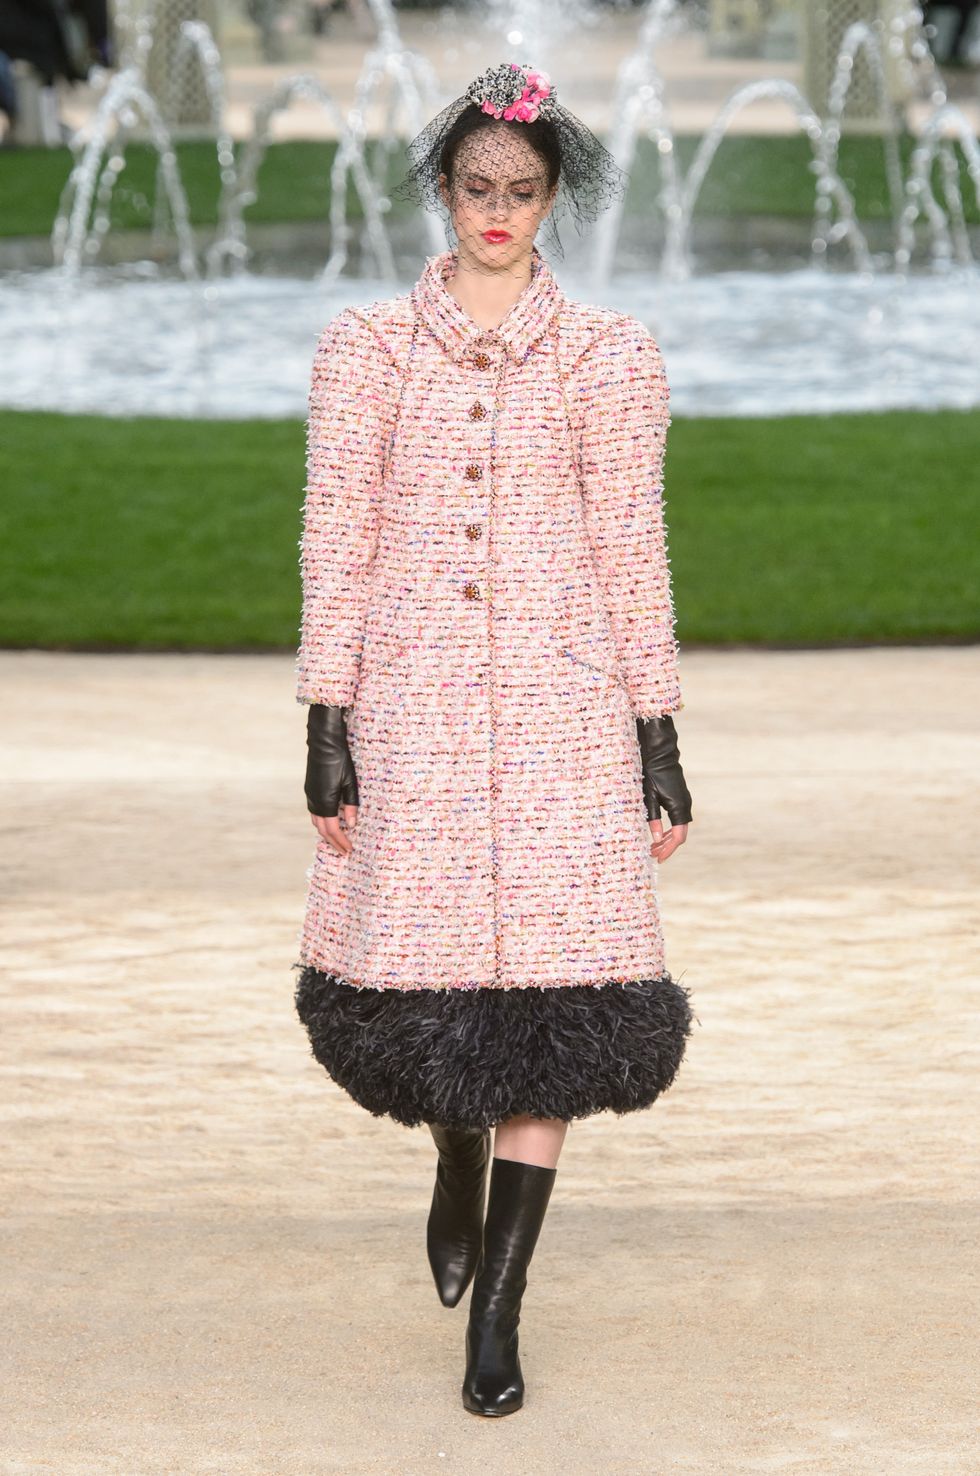 Chanel haute couture show takes viewers on journey through luxurious French  wardrobe